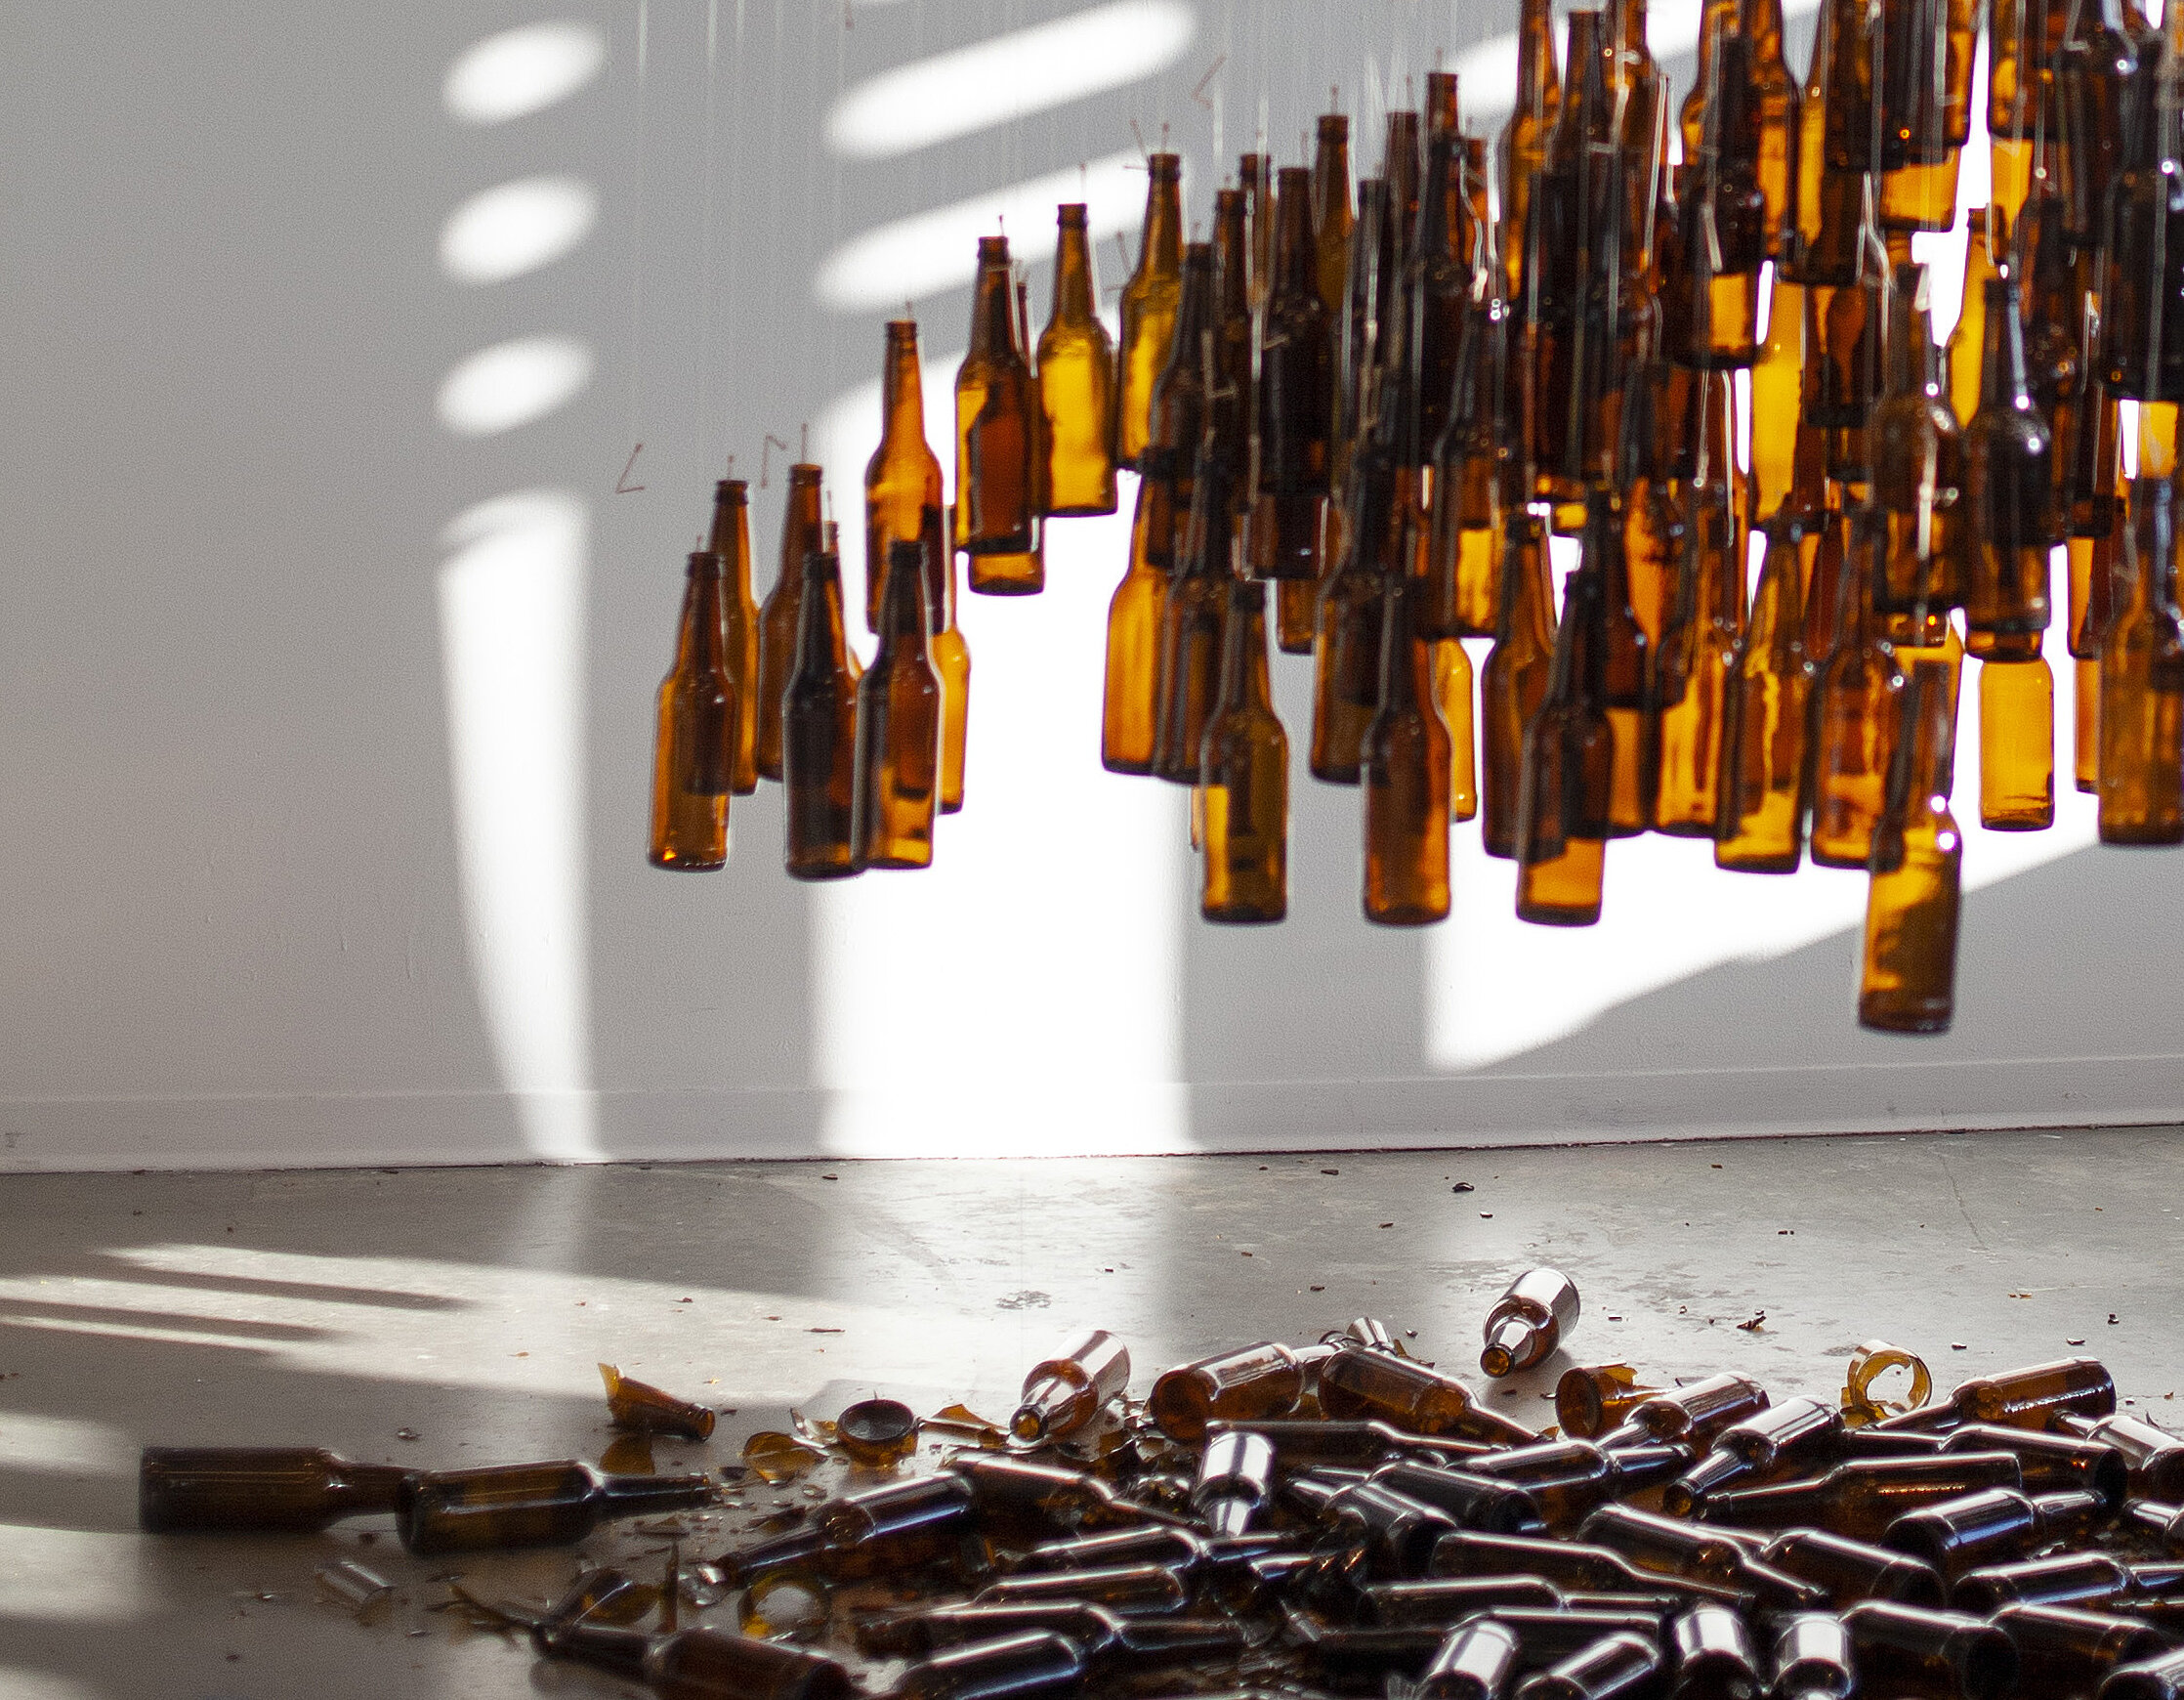  Anna Miller  HOURGLASS , 2019 Toothpicks, beer bottles, thread, wood, rope 180 x 108 inches (457 x 274 cm) 